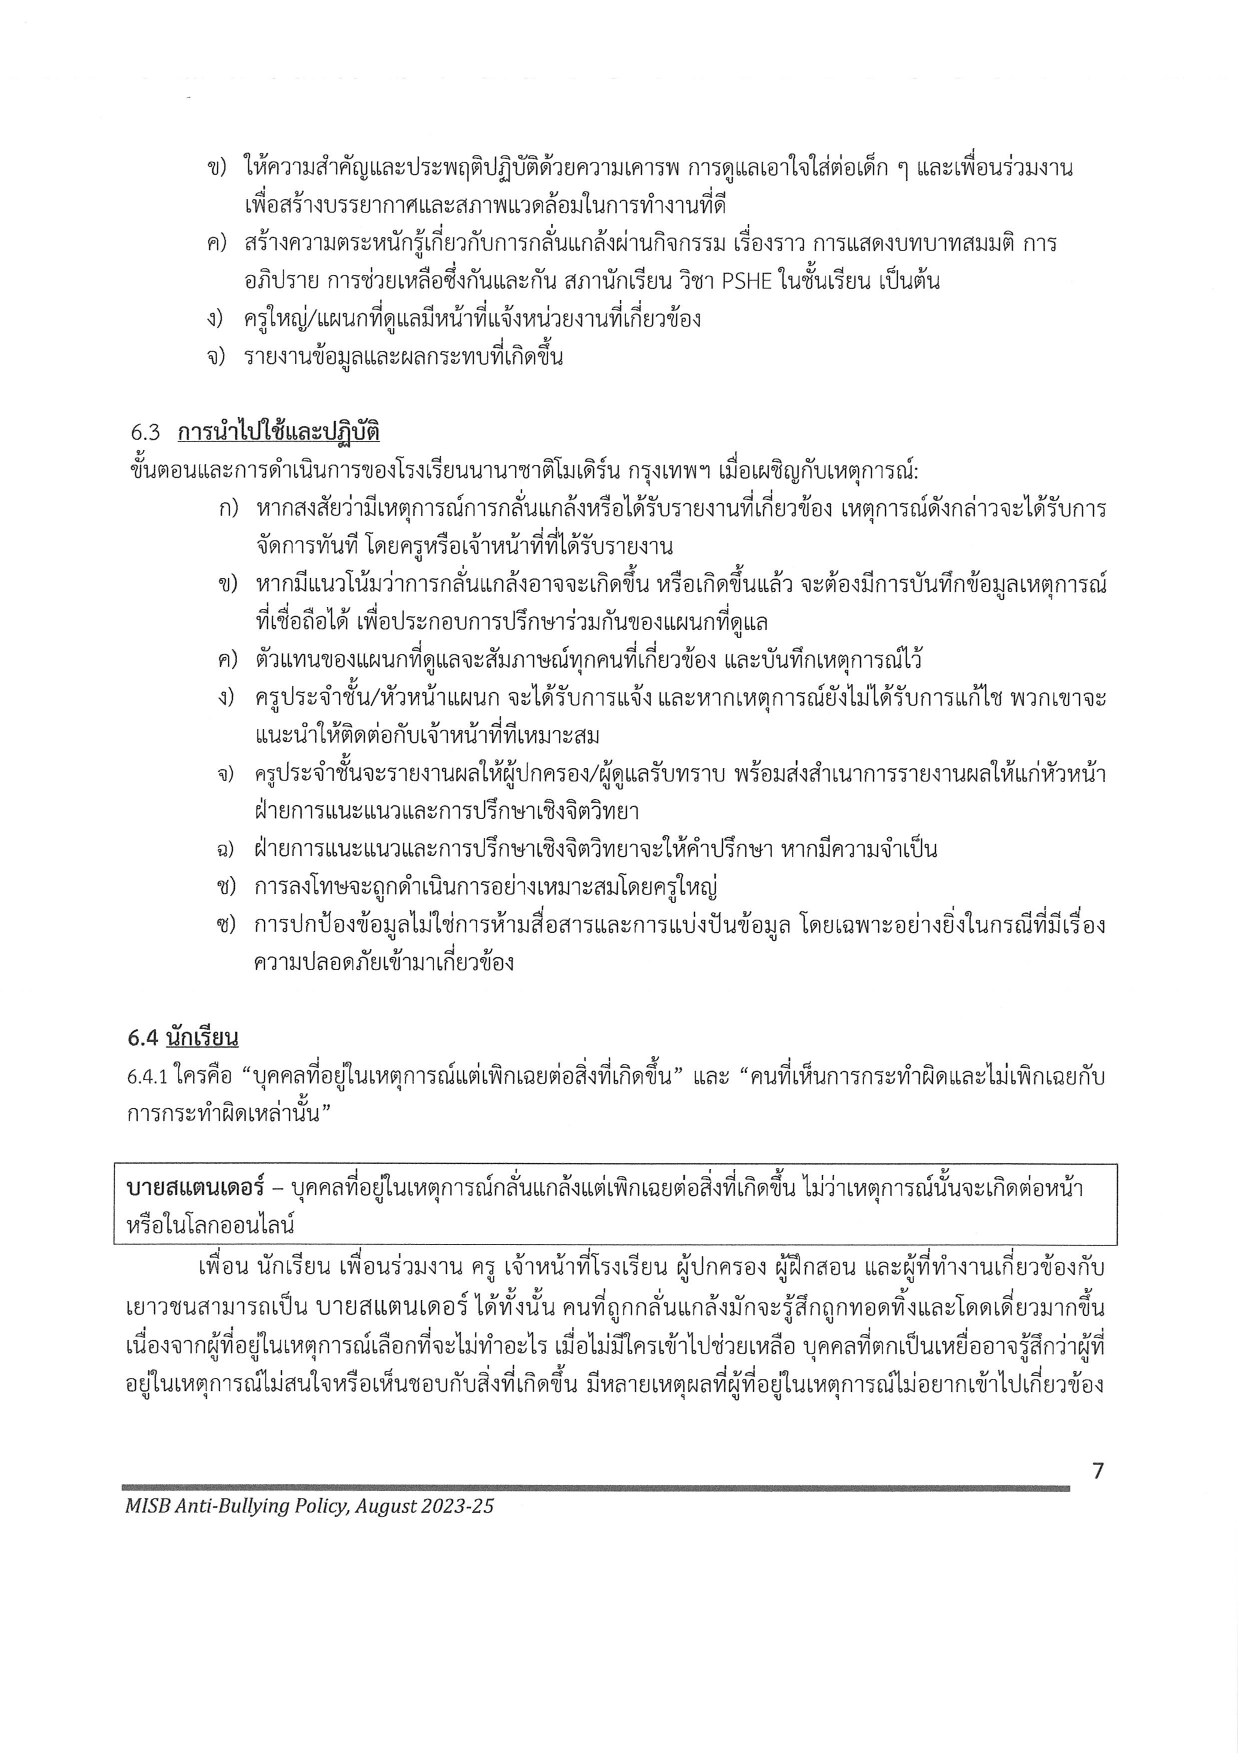 Anti Bullying Policy 2023 2025 Thai page 0009